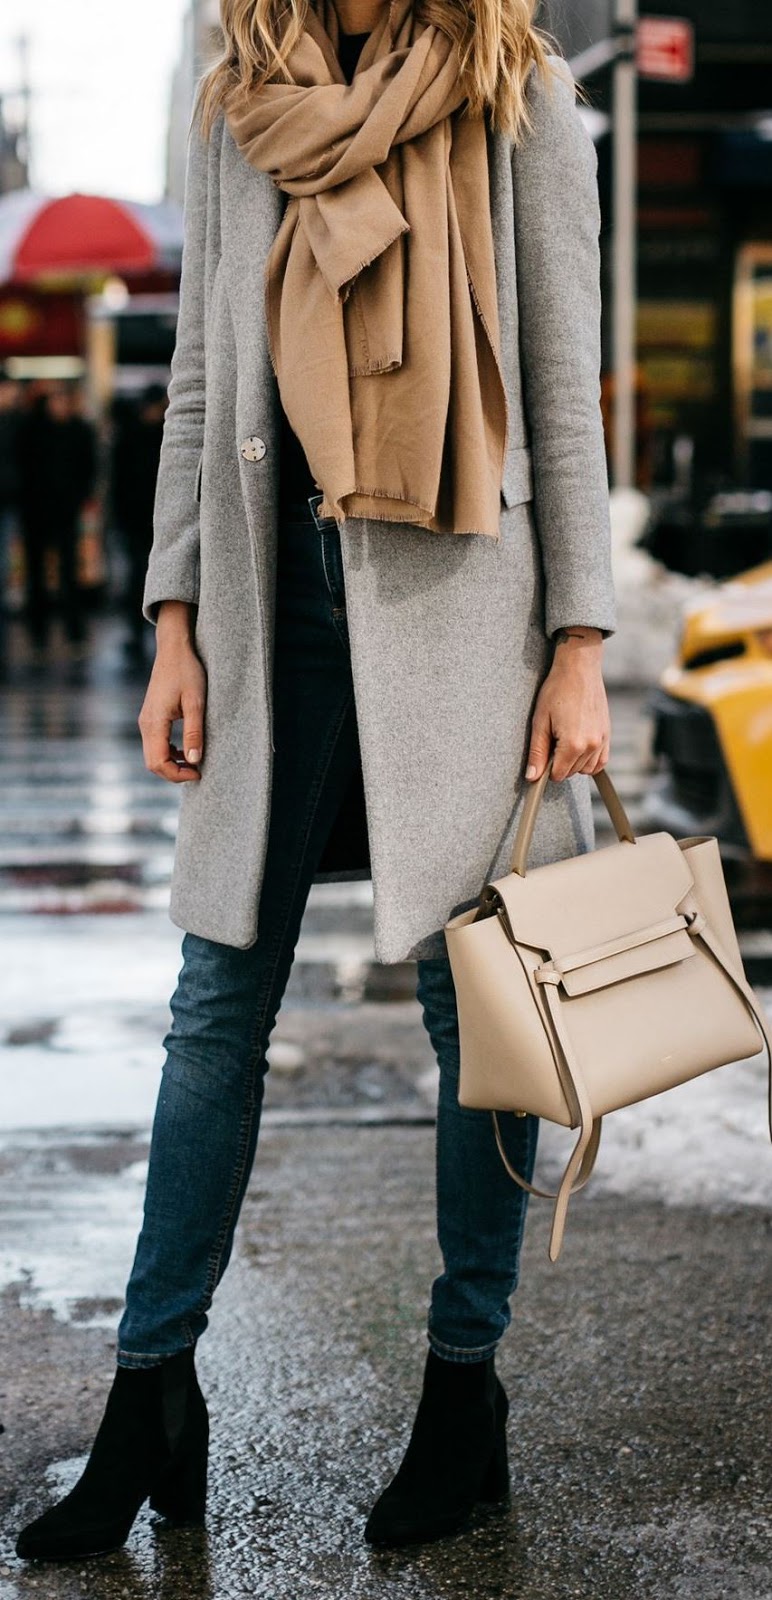 cool outfit idea : grey cashmere coat + nude scarf + bag + jeans + boots